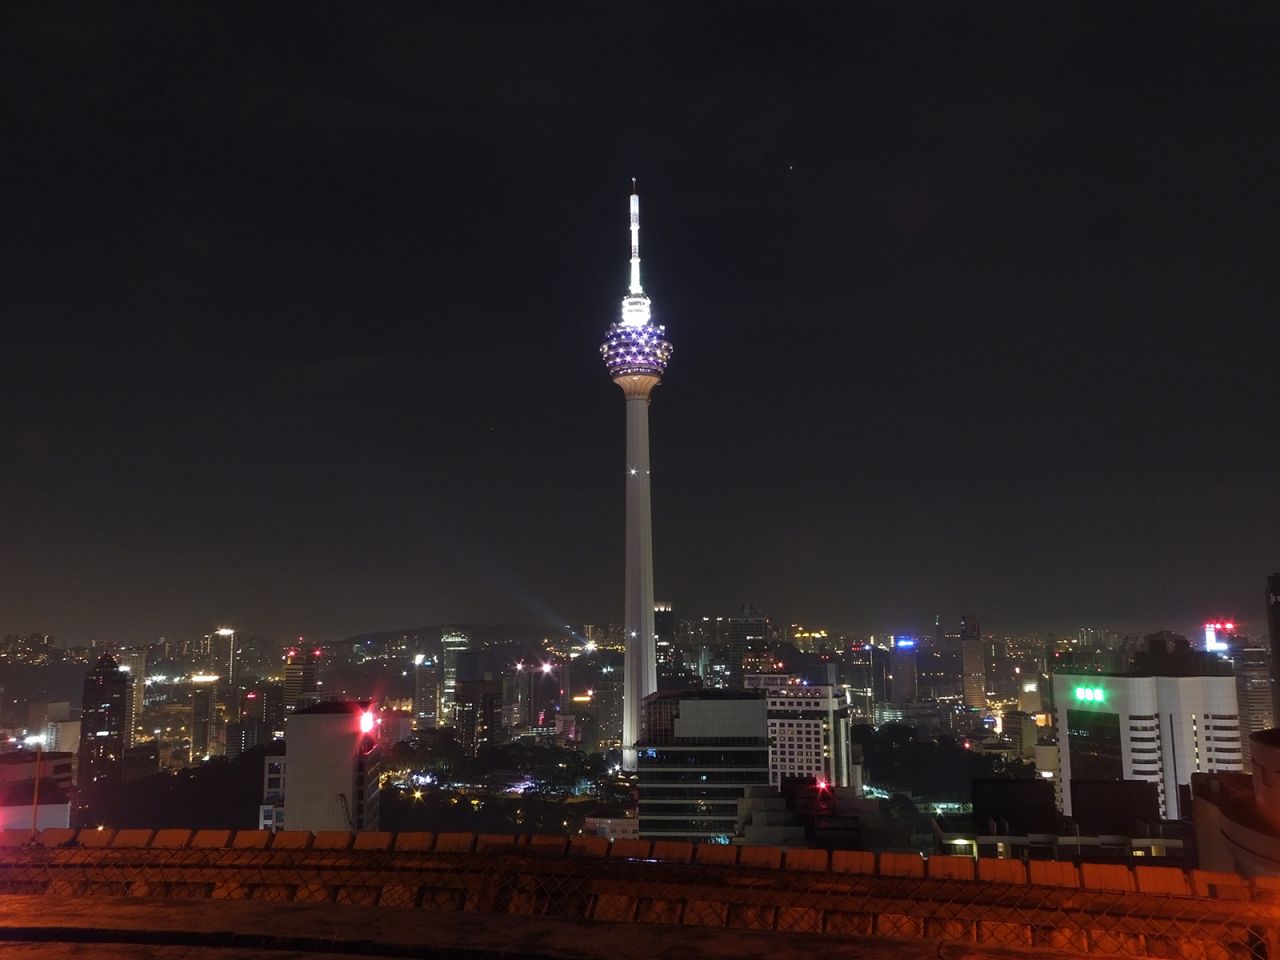 Revinson Martin was in Kuala Lumpur, Malaysia, where he photographed the <a href="http://ireport.cnn.com/docs/DOC-1136478">Kuala Lumpur Tower</a>. Also known as the KL Tower, it was built in 1995 and is used for communication purposes. The tower also features a large antenna on top.